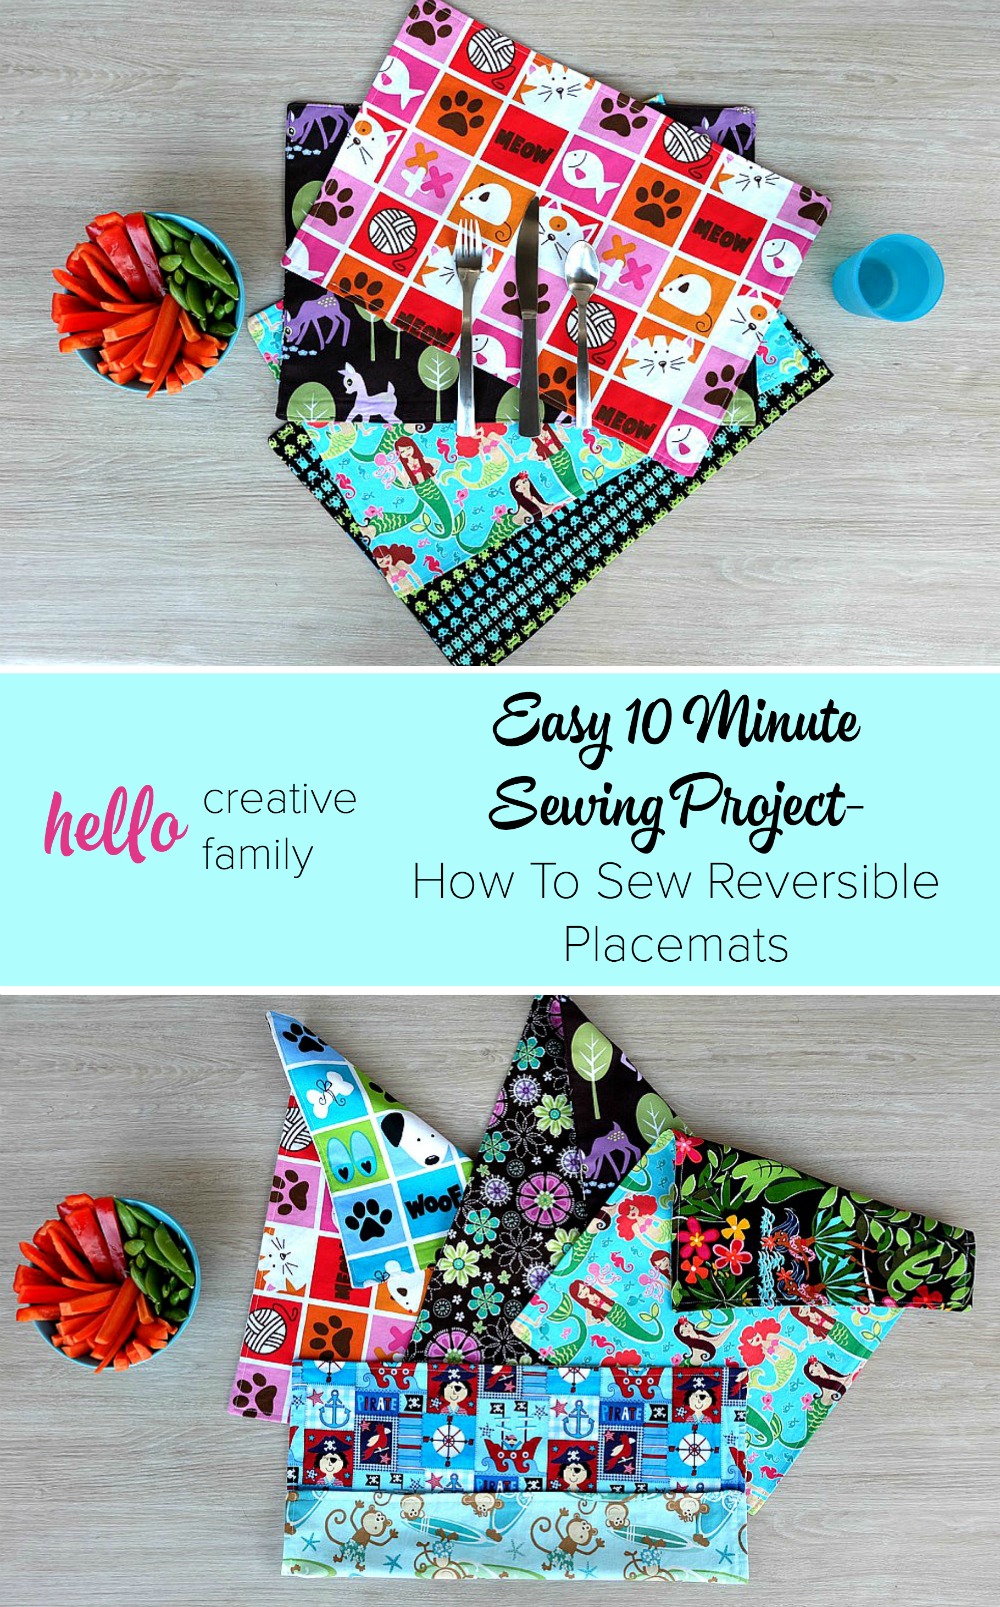 This 10 minute sewing project is perfect for beginner sewers. This free tutorial has step by step photos that make it easy to make customized placemats that kids and adults will love. A great handmade gift idea, this project is easy enough for kids new to sewing!